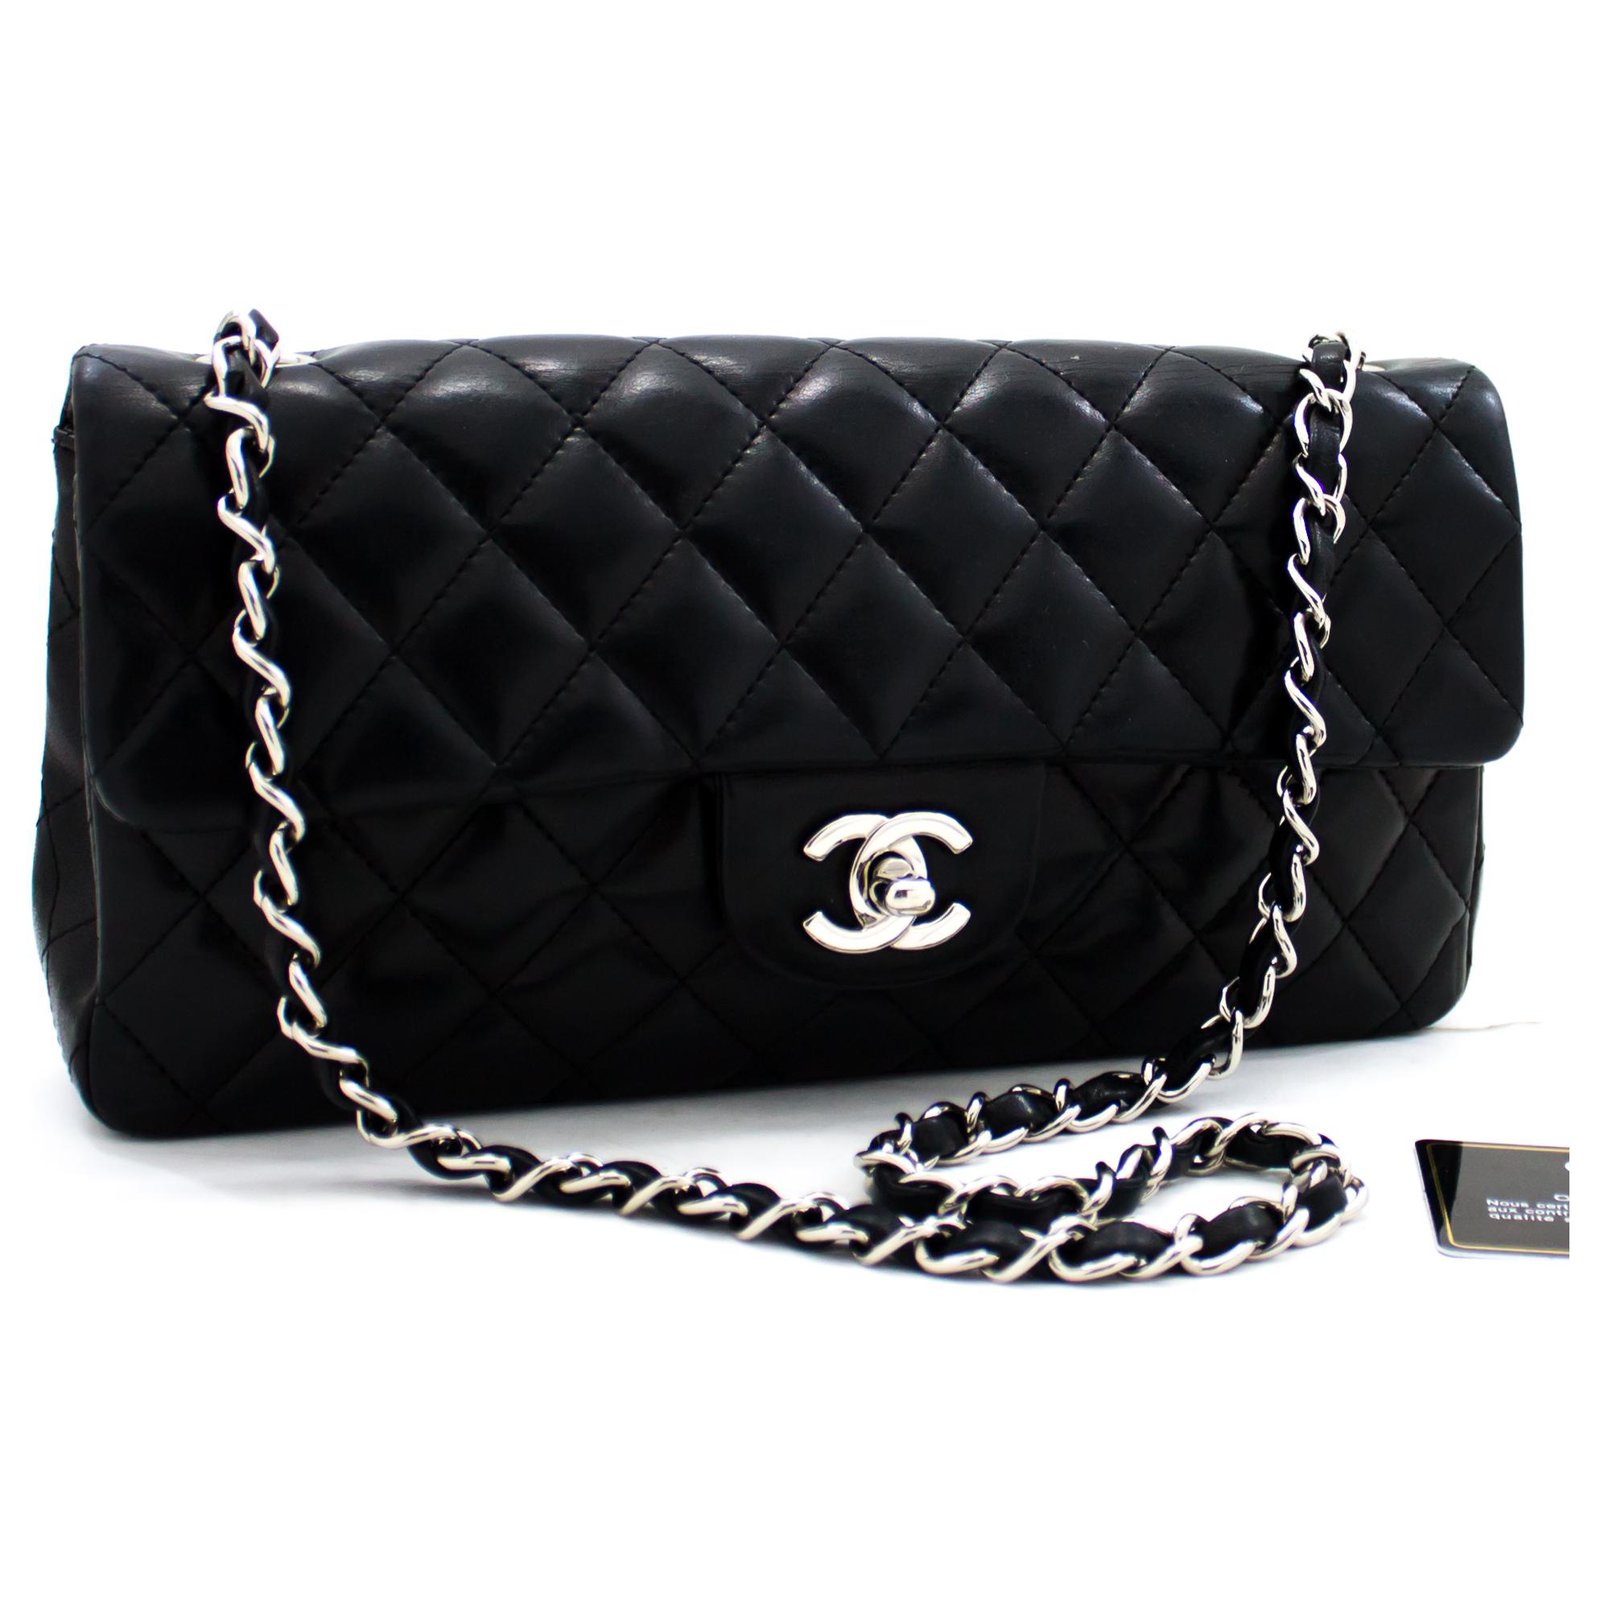 CHANEL Silver Hw Single Flap Chain Shoulder Bag Black Quilted Lam